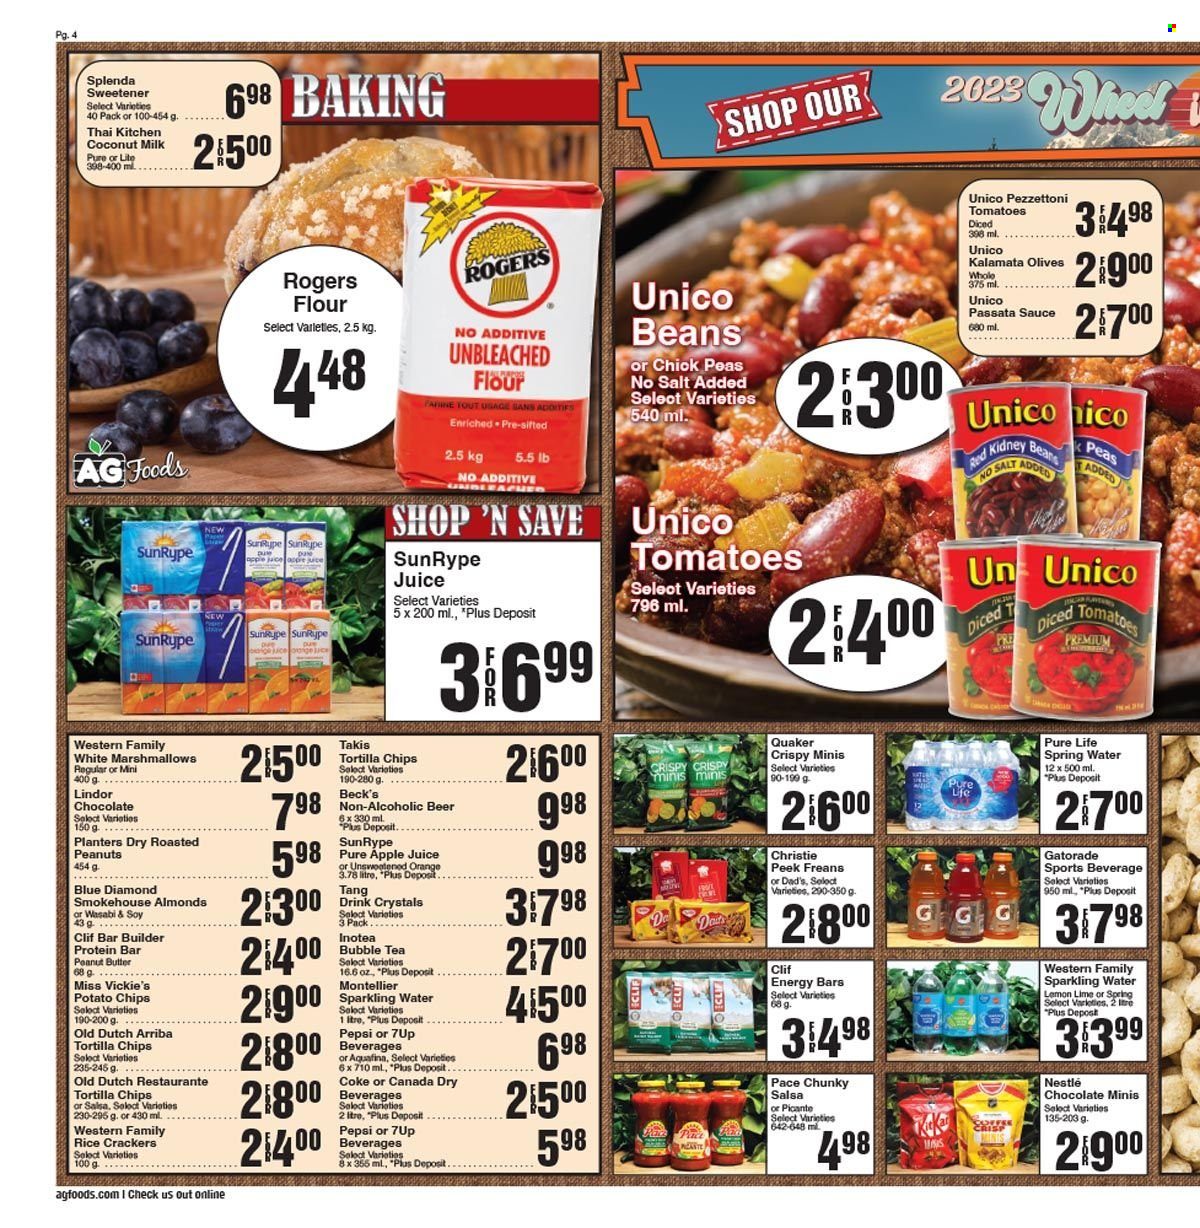 thumbnail - AG Foods Flyer - May 28, 2023 - July 03, 2023 - Sales products - beans, peas, sauce, Quaker, marshmallows, crackers, tortilla chips, potato chips, chips, rice crackers, sweetener, coconut milk, olives, protein bar, energy bar, salsa, peanut butter, almonds, roasted peanuts, peanuts, Planters, Blue Diamond, apple juice, Canada Dry, Coca-Cola, Pepsi, juice, soft drink, 7UP, Gatorade, Coke, Aquafina, spring water, sparkling water, water, tea, bubble tea, alcohol, beer, Beck's, non-alcoholic beer, electrolyte drink, Nestlé, Lindor. Page 4.